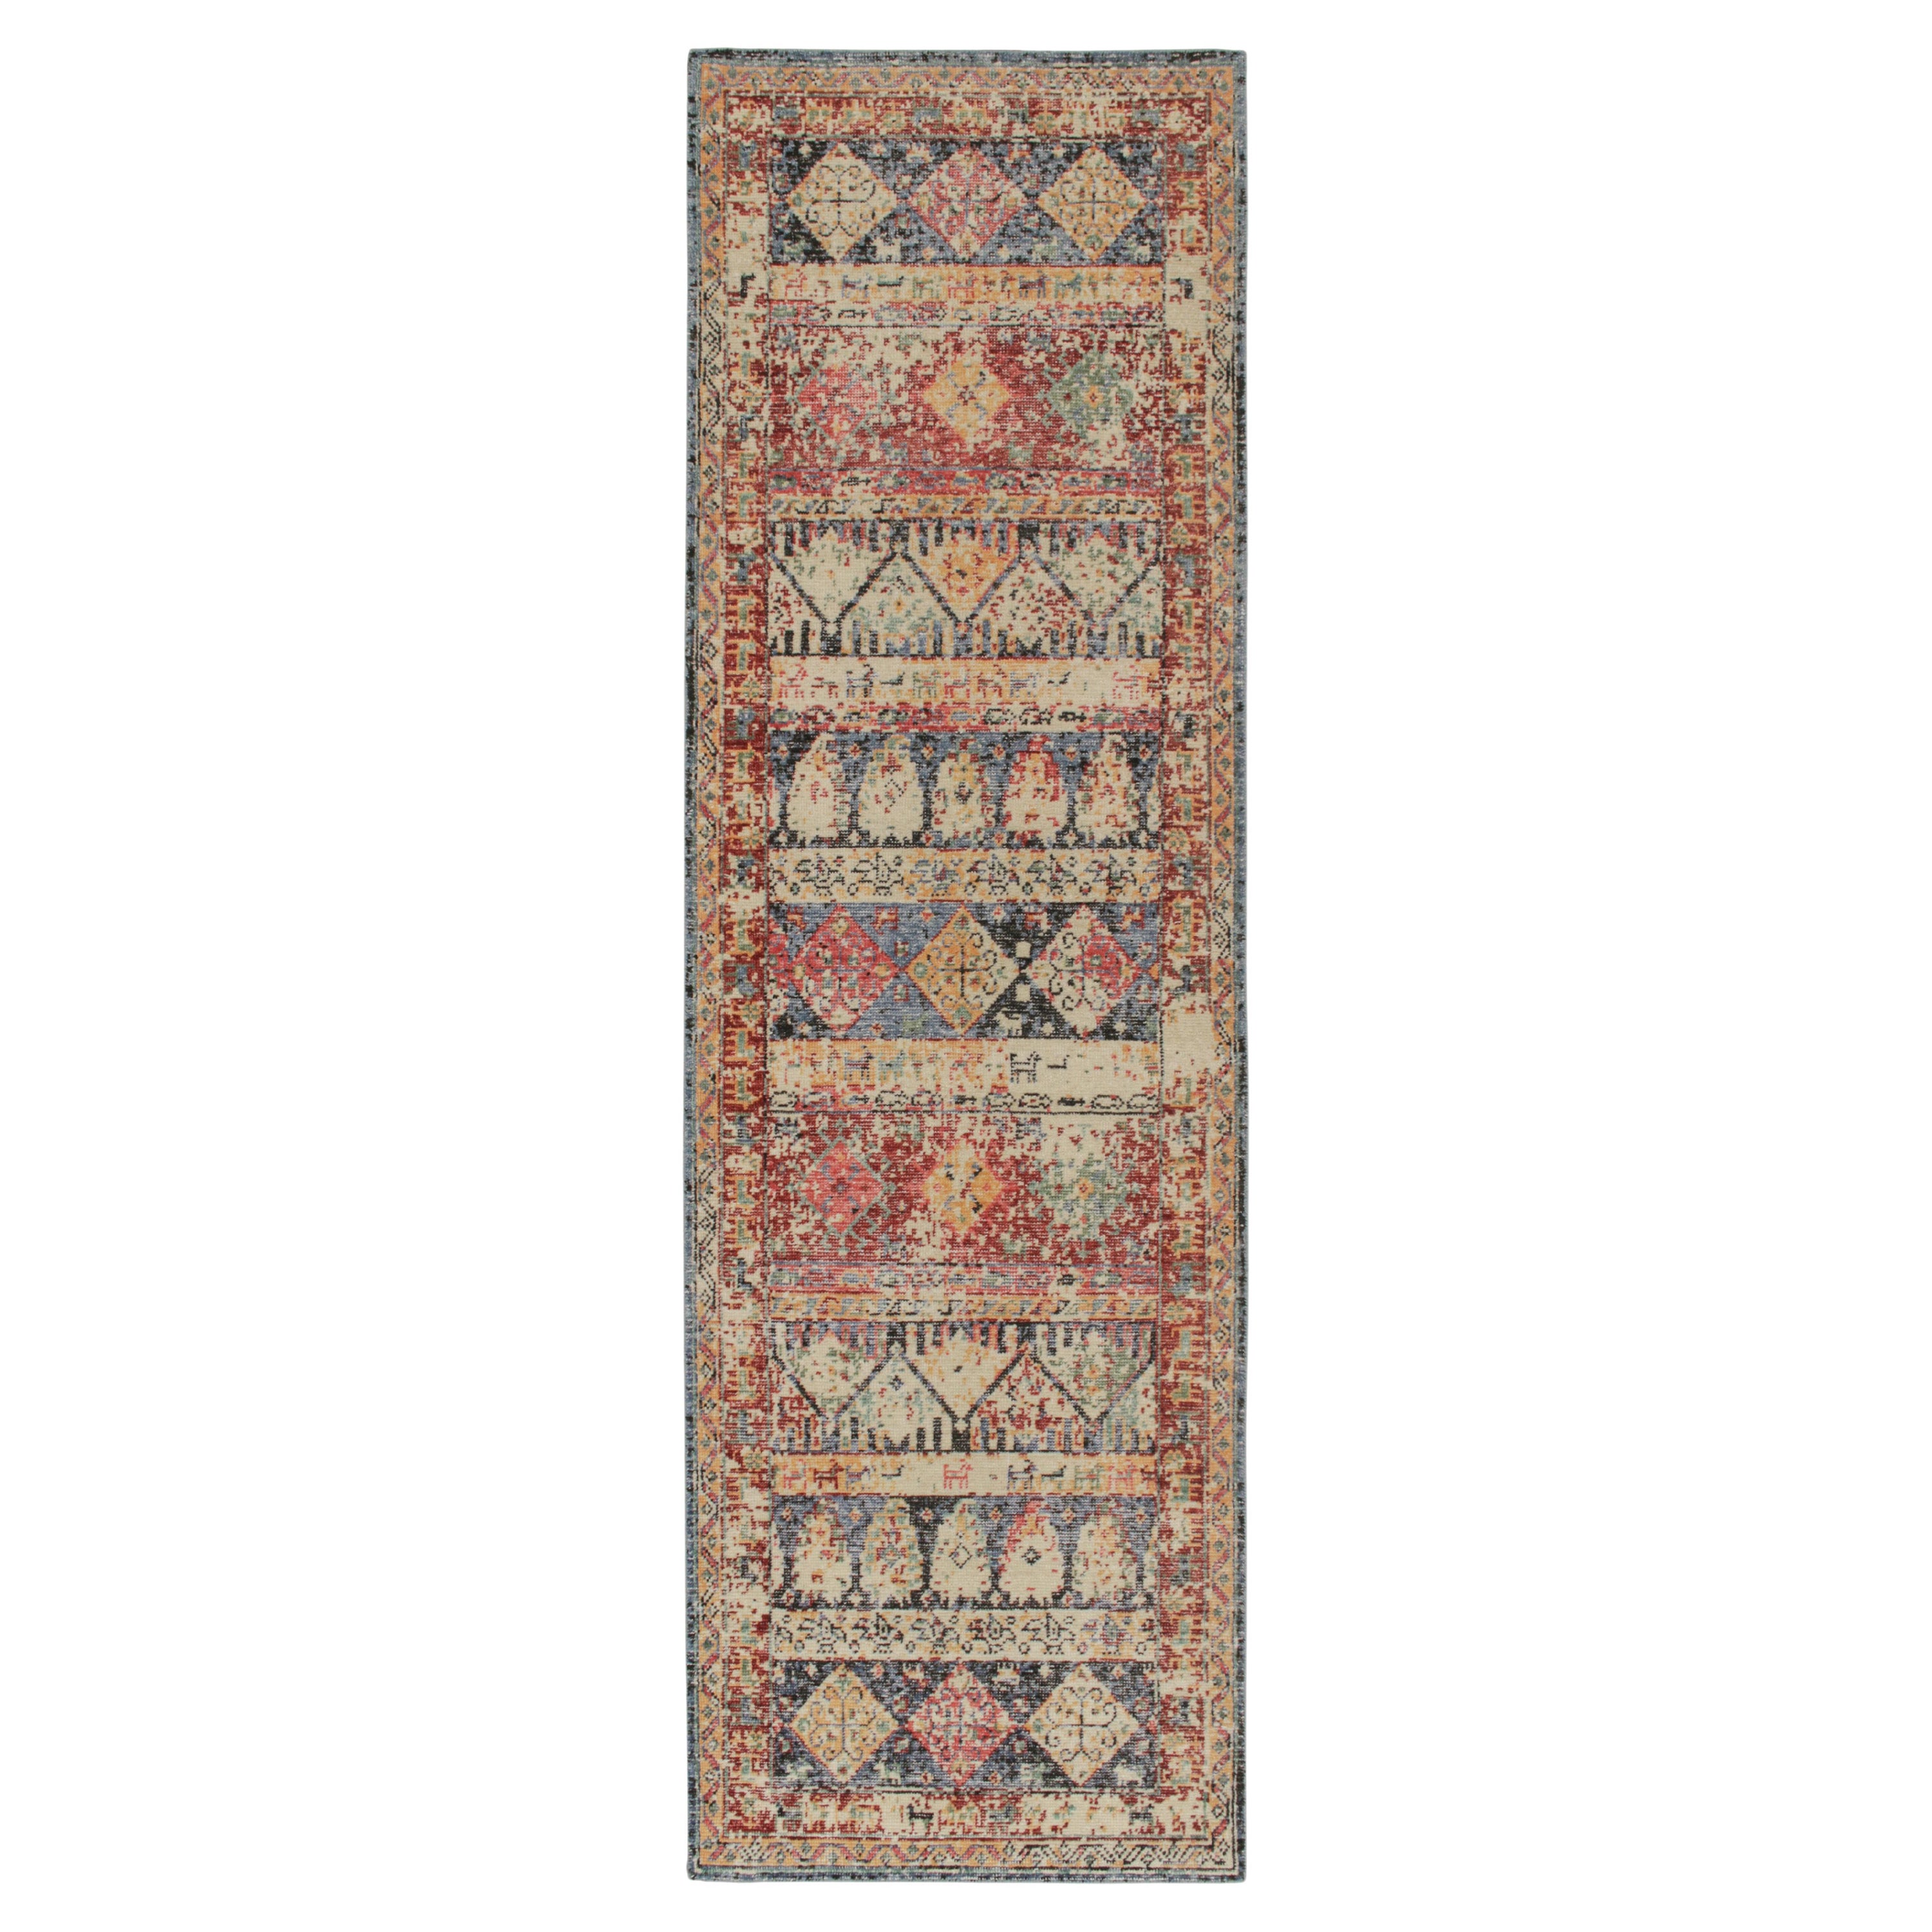 Rug & Kilim’s Distressed Tribal Style Runner in Polychromatic Geometric Patterns